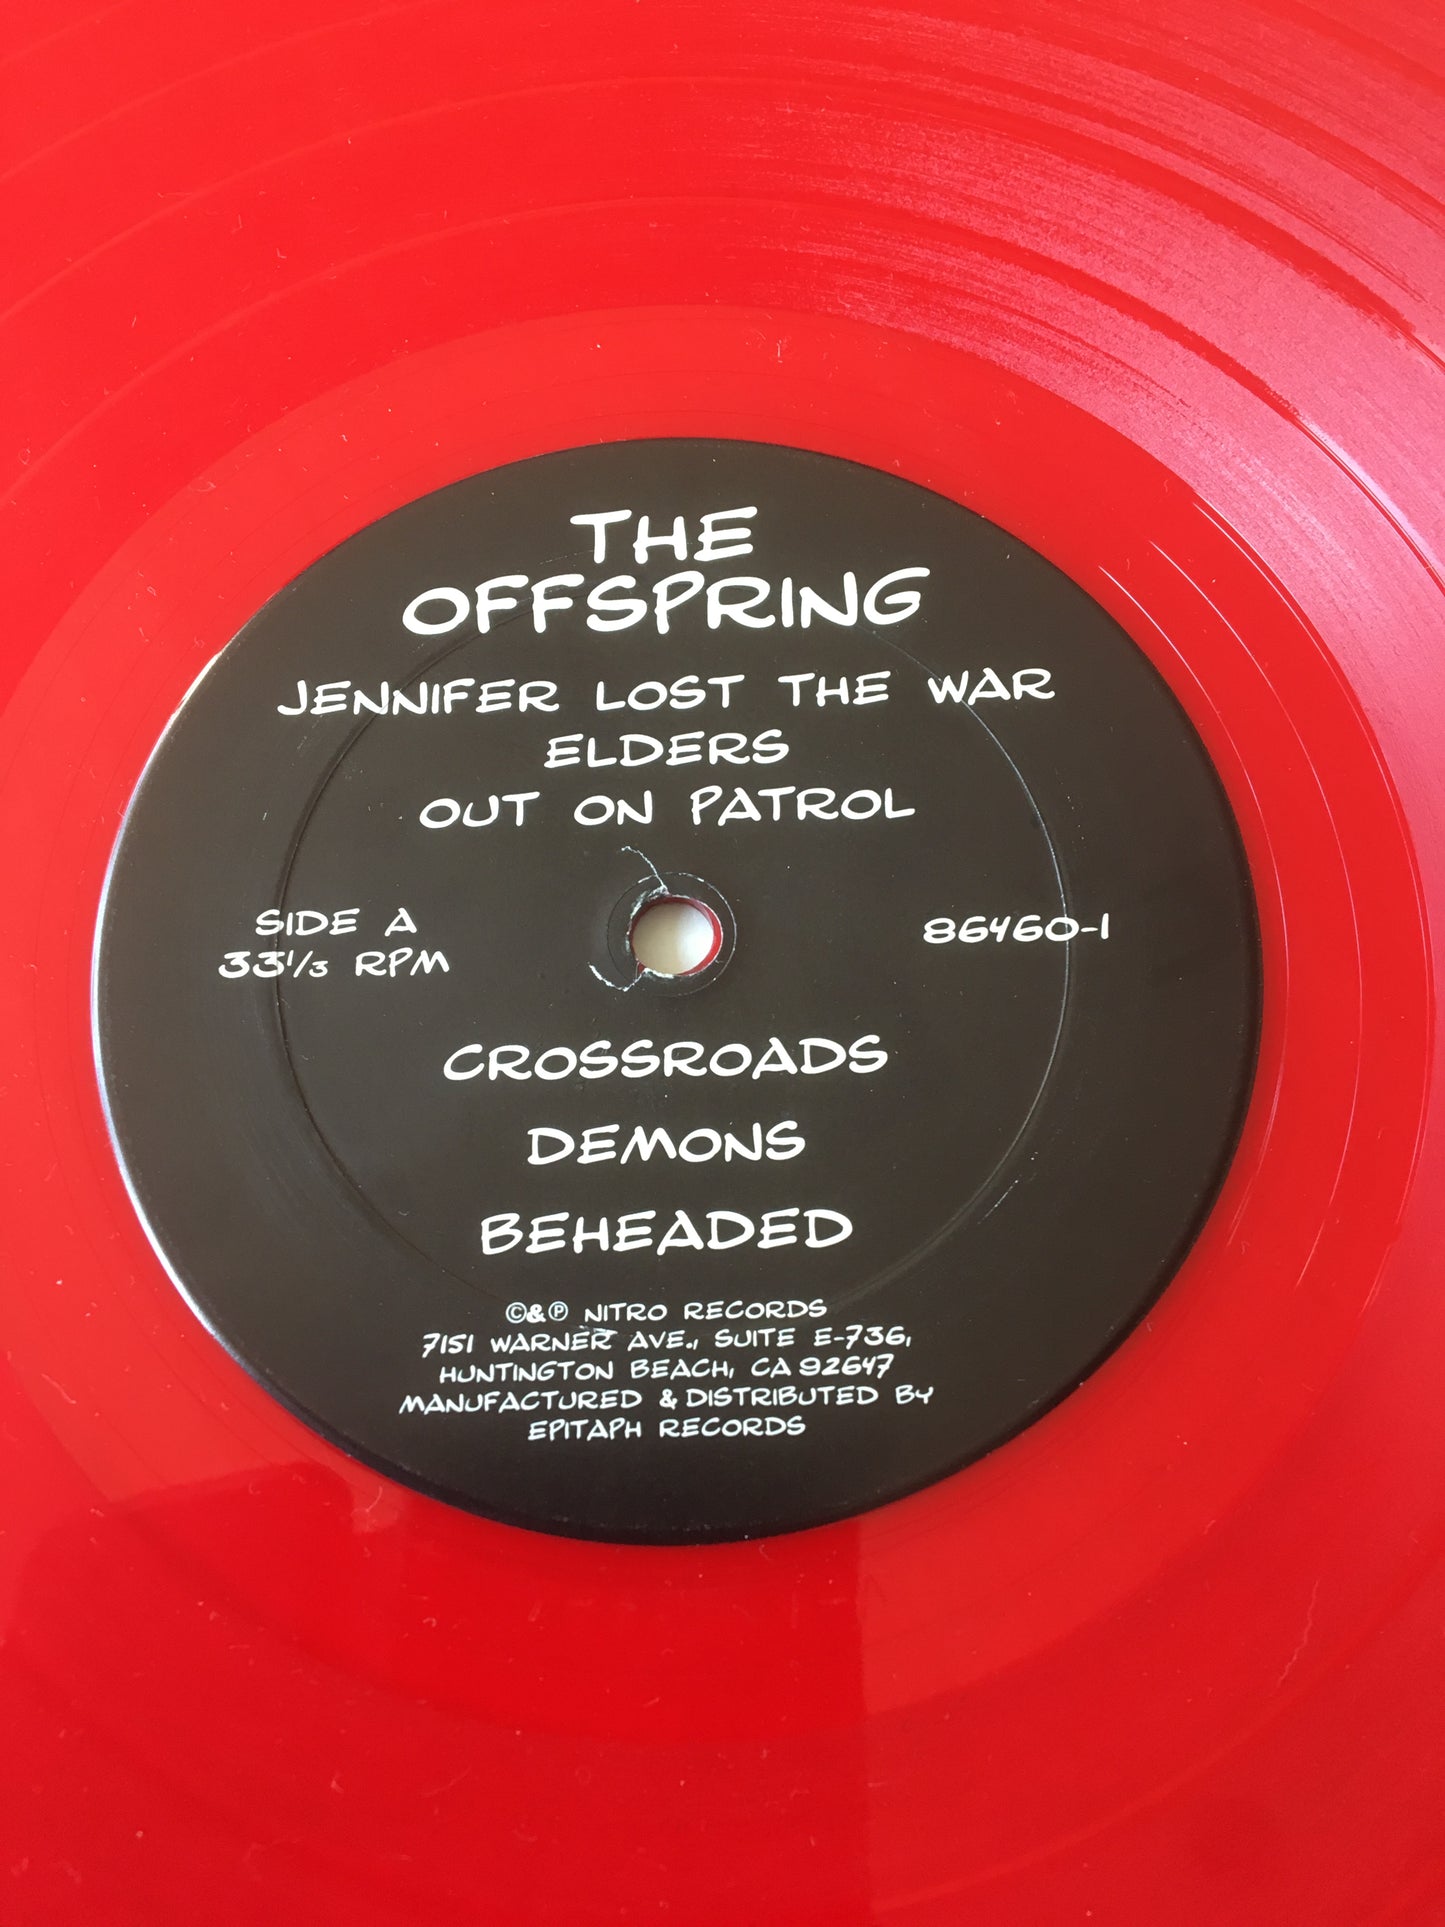 The OFFSPRING self titled Debut